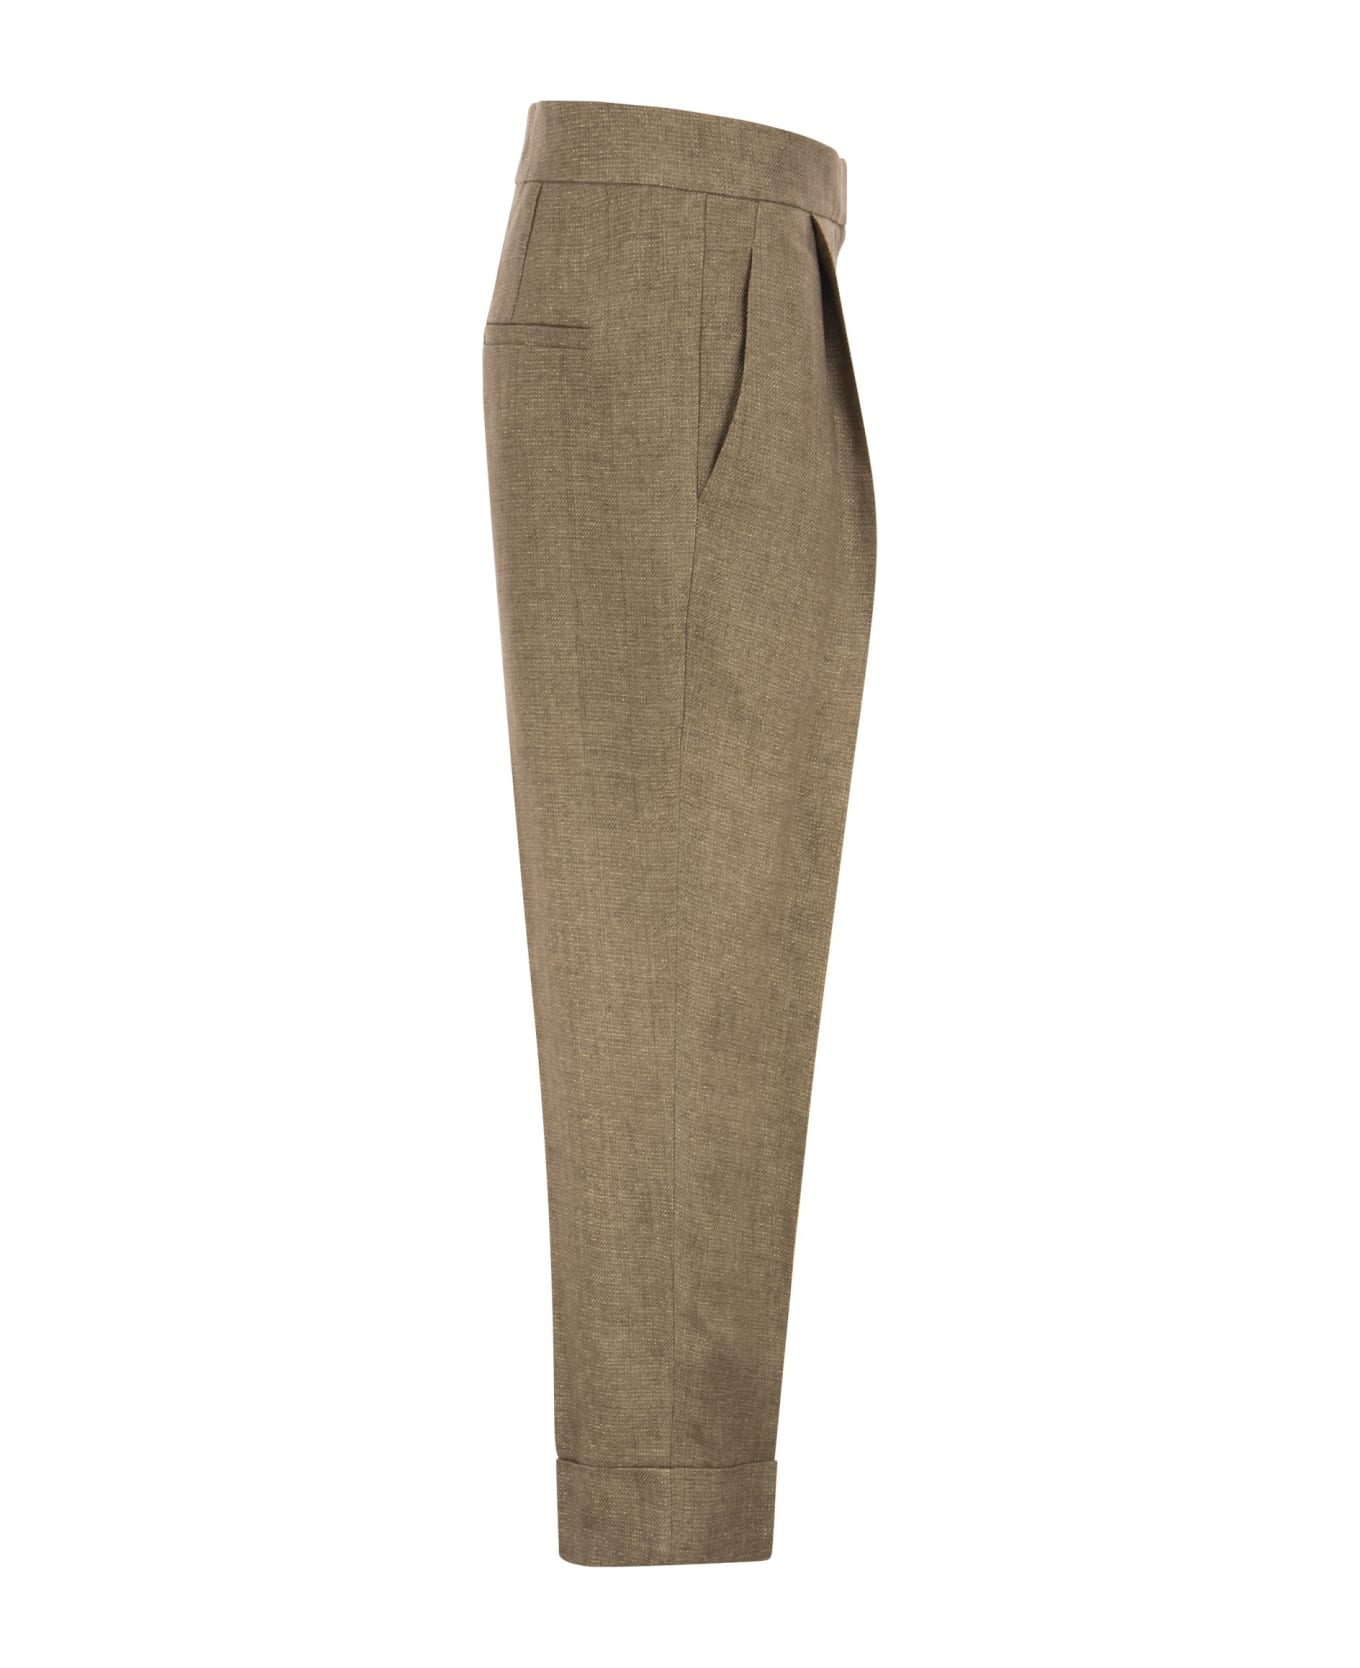 Brunello Cucinelli Relaxed Sartorial Trousers - CAMEL/ORO